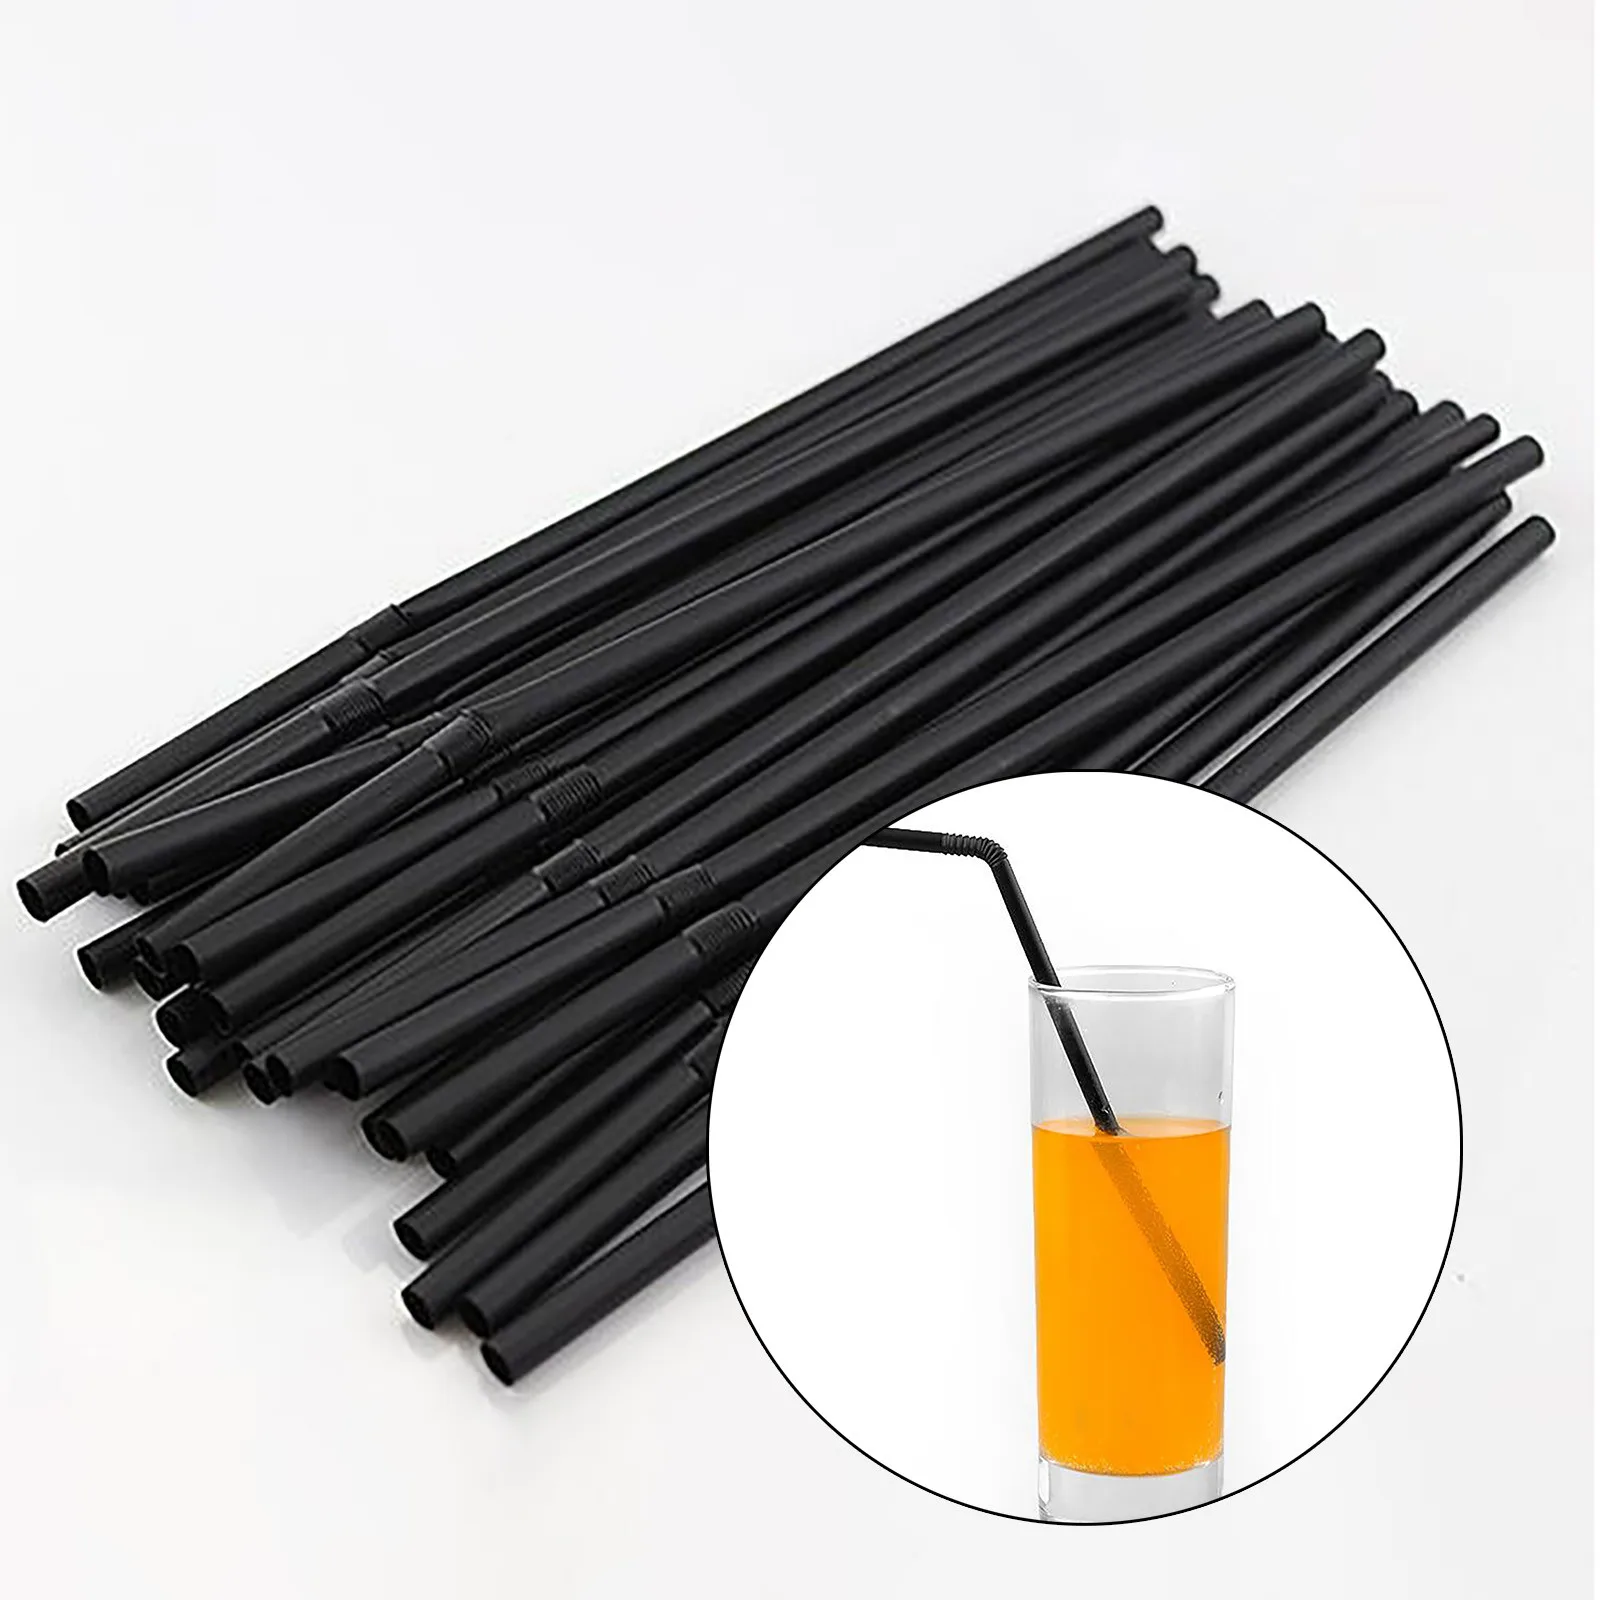 

21cm Disposable Cutlery Black Elbow Material Straws For Drinks Party Home Plastic Straws Kitchen Gadgets słomki plastikowe